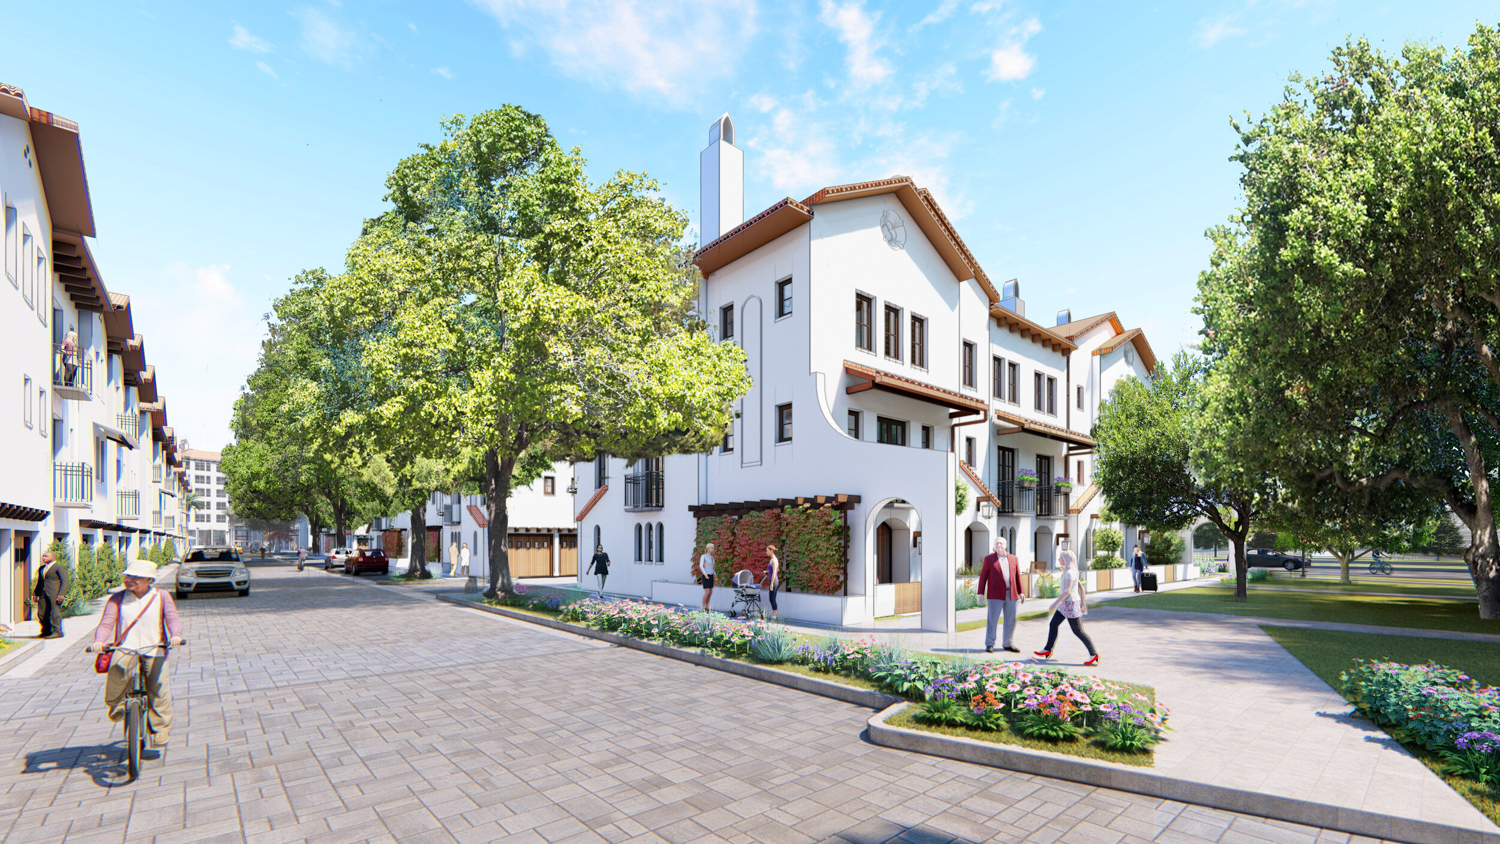 Townhomes within the Westport Cupertino project at 21267 Stevens Creek Boulevard, design by C2K Architecture